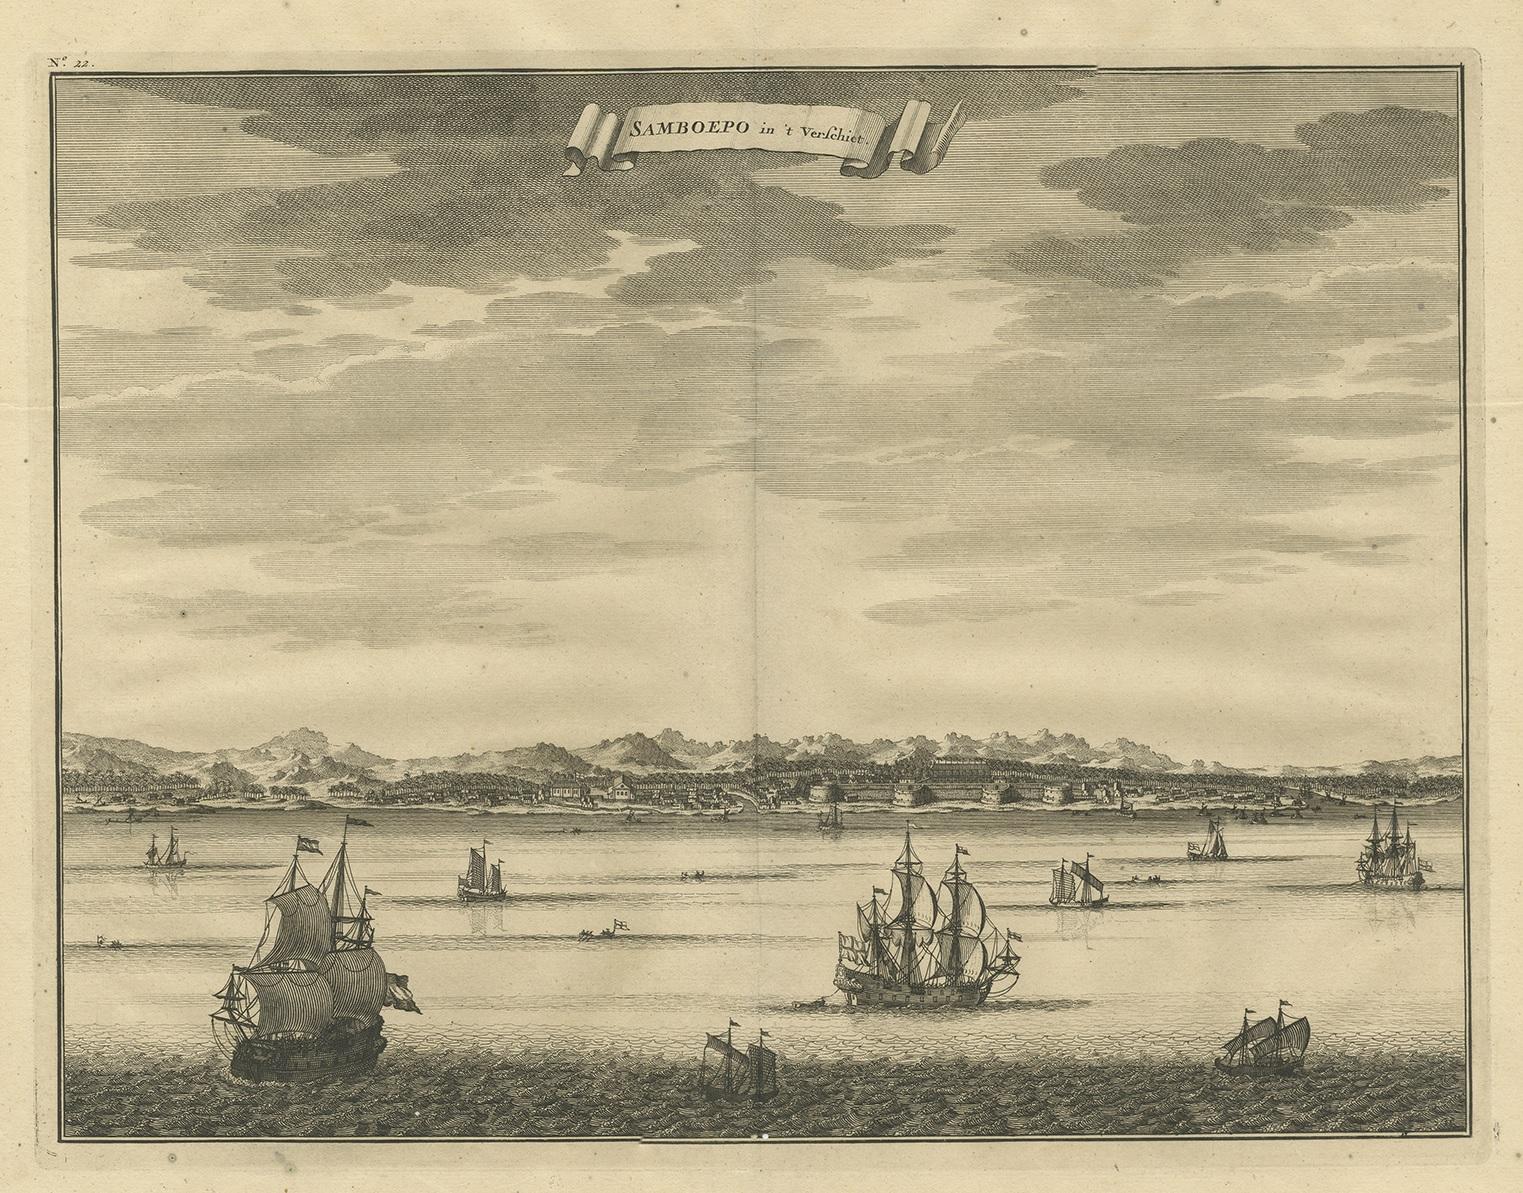 Antique print titled 'Samboepo in 't Verschiet'. Engraved view of the city of Samboepo (Makassar or Ujung Pandang) in Sulawesi with ships in the foreground. This print originates from 'Oud en Nieuw Oost-Indiën' by F. Valentijn.